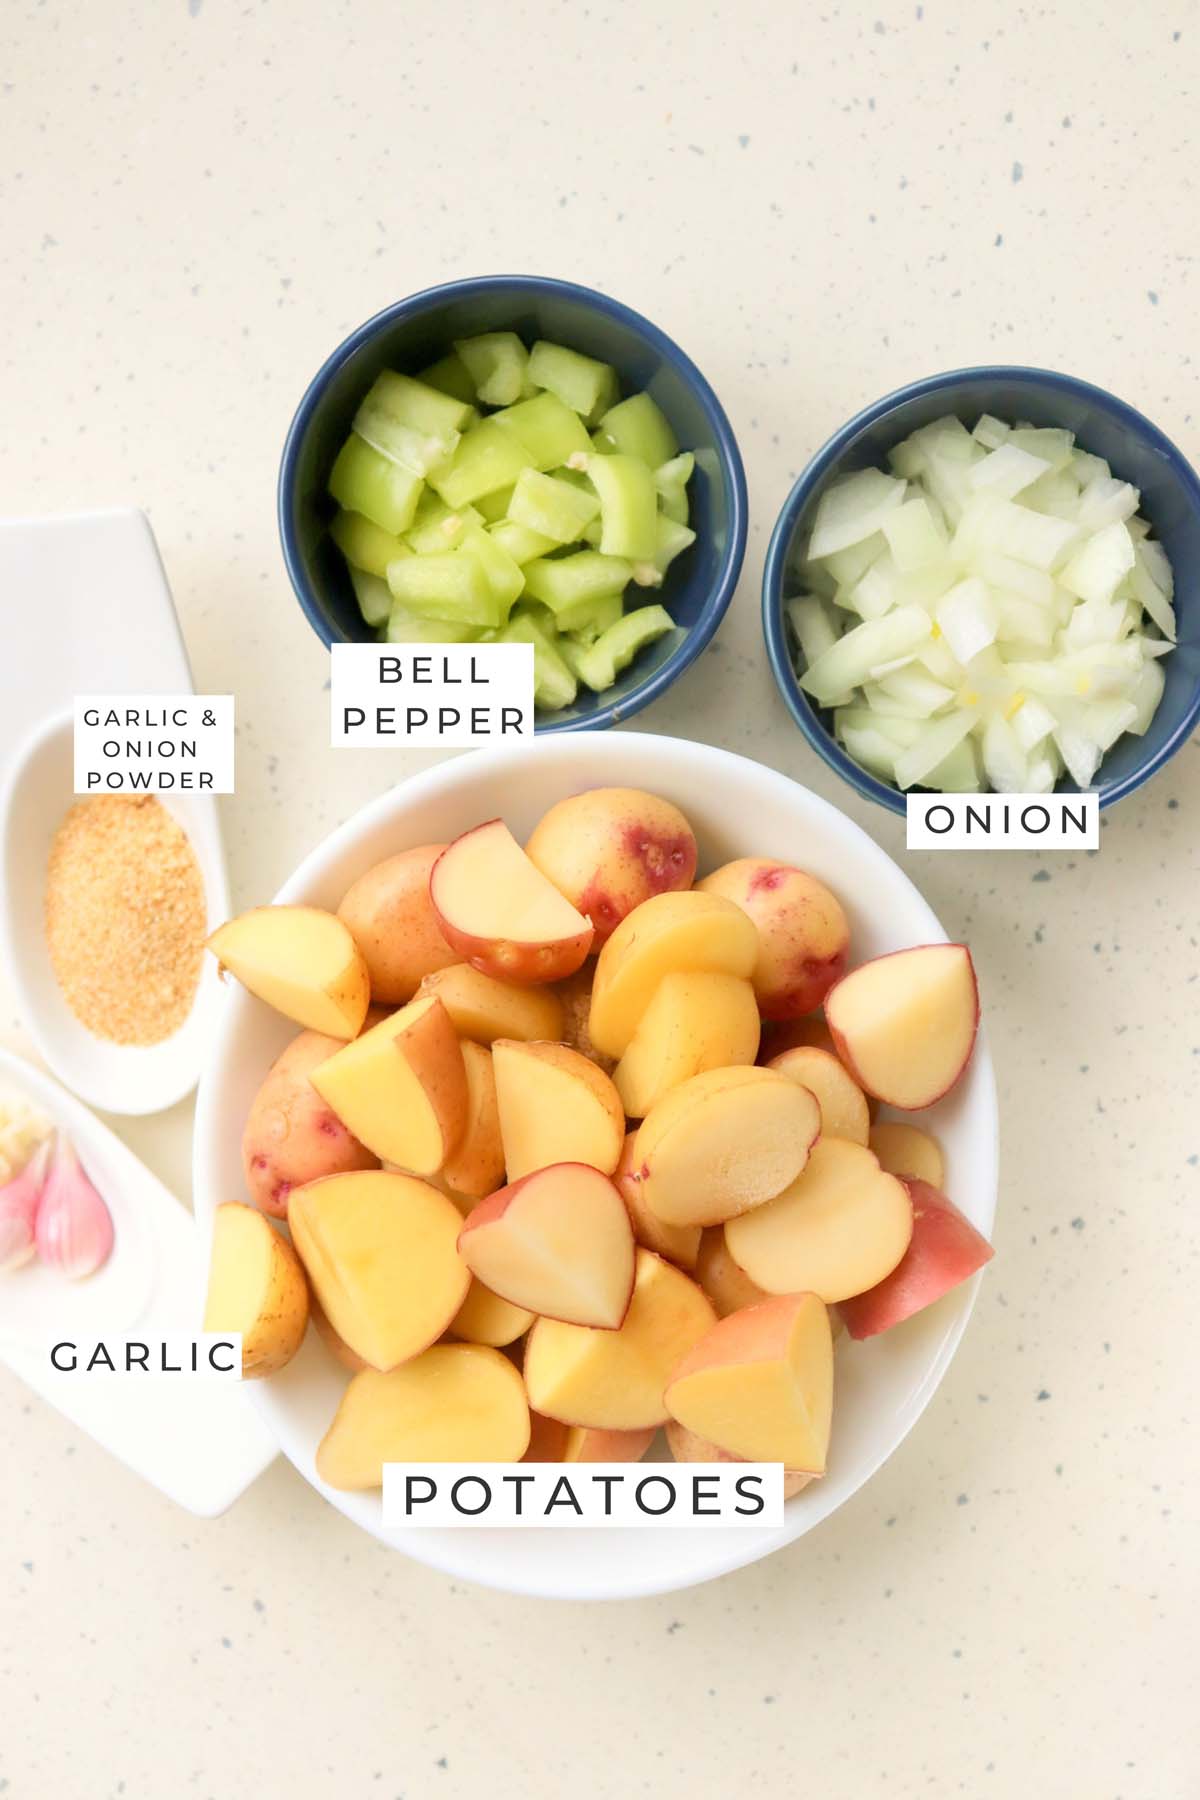 Labeled ingredients for the breakfast potatoes.